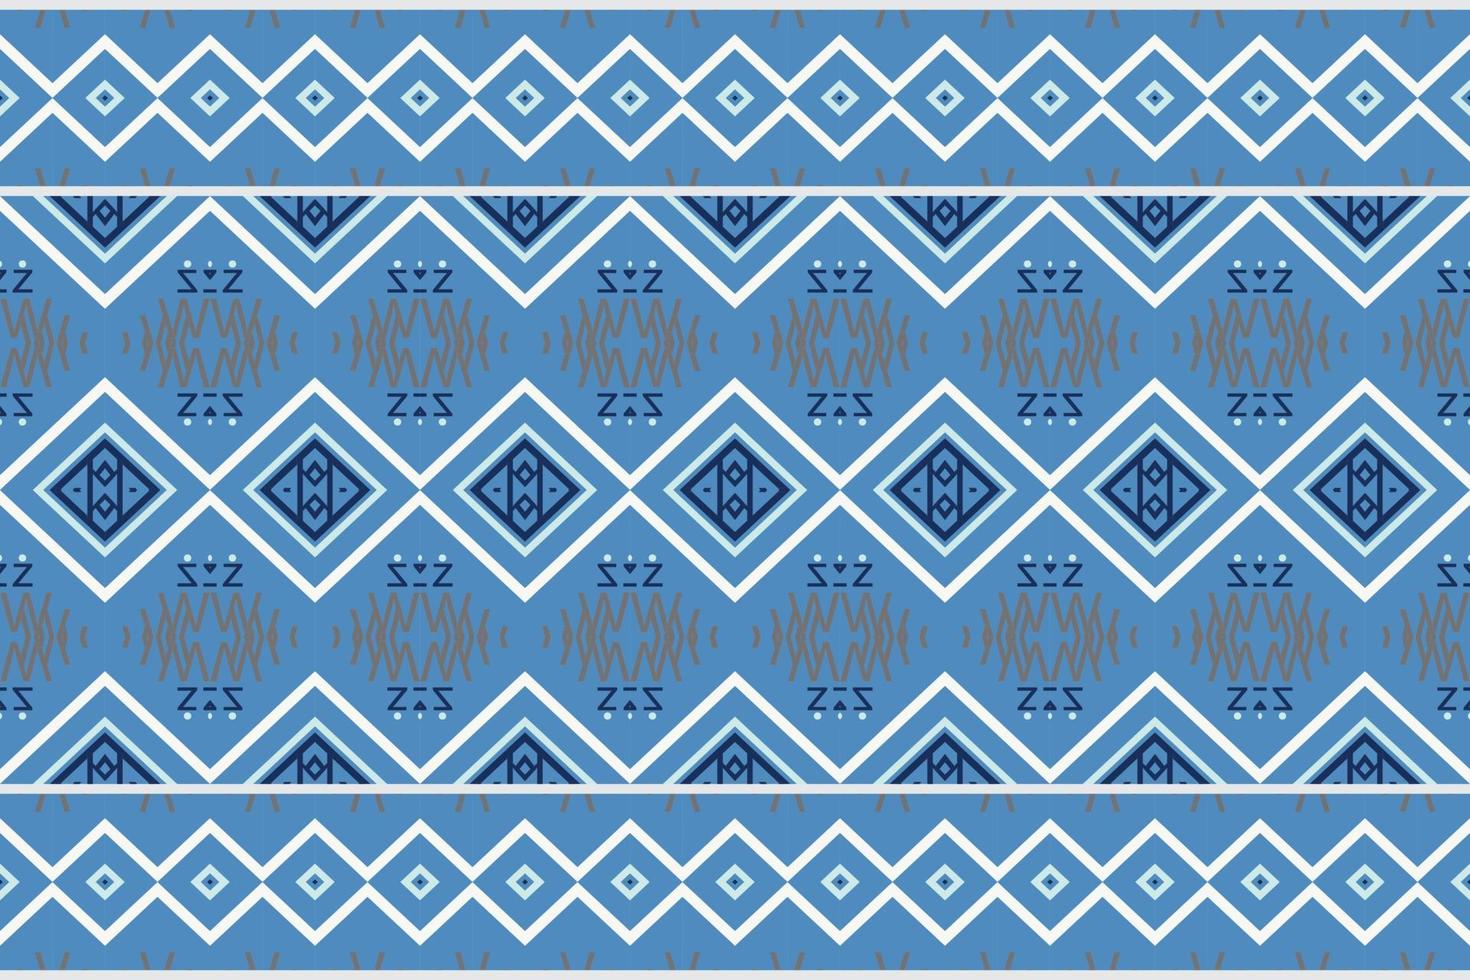 African Motif Ethnic seamless pattern background. geometric ethnic oriental pattern traditional. Ethnic Aztec style abstract vector illustration. design for print texture,fabric,saree,sari,carpet.